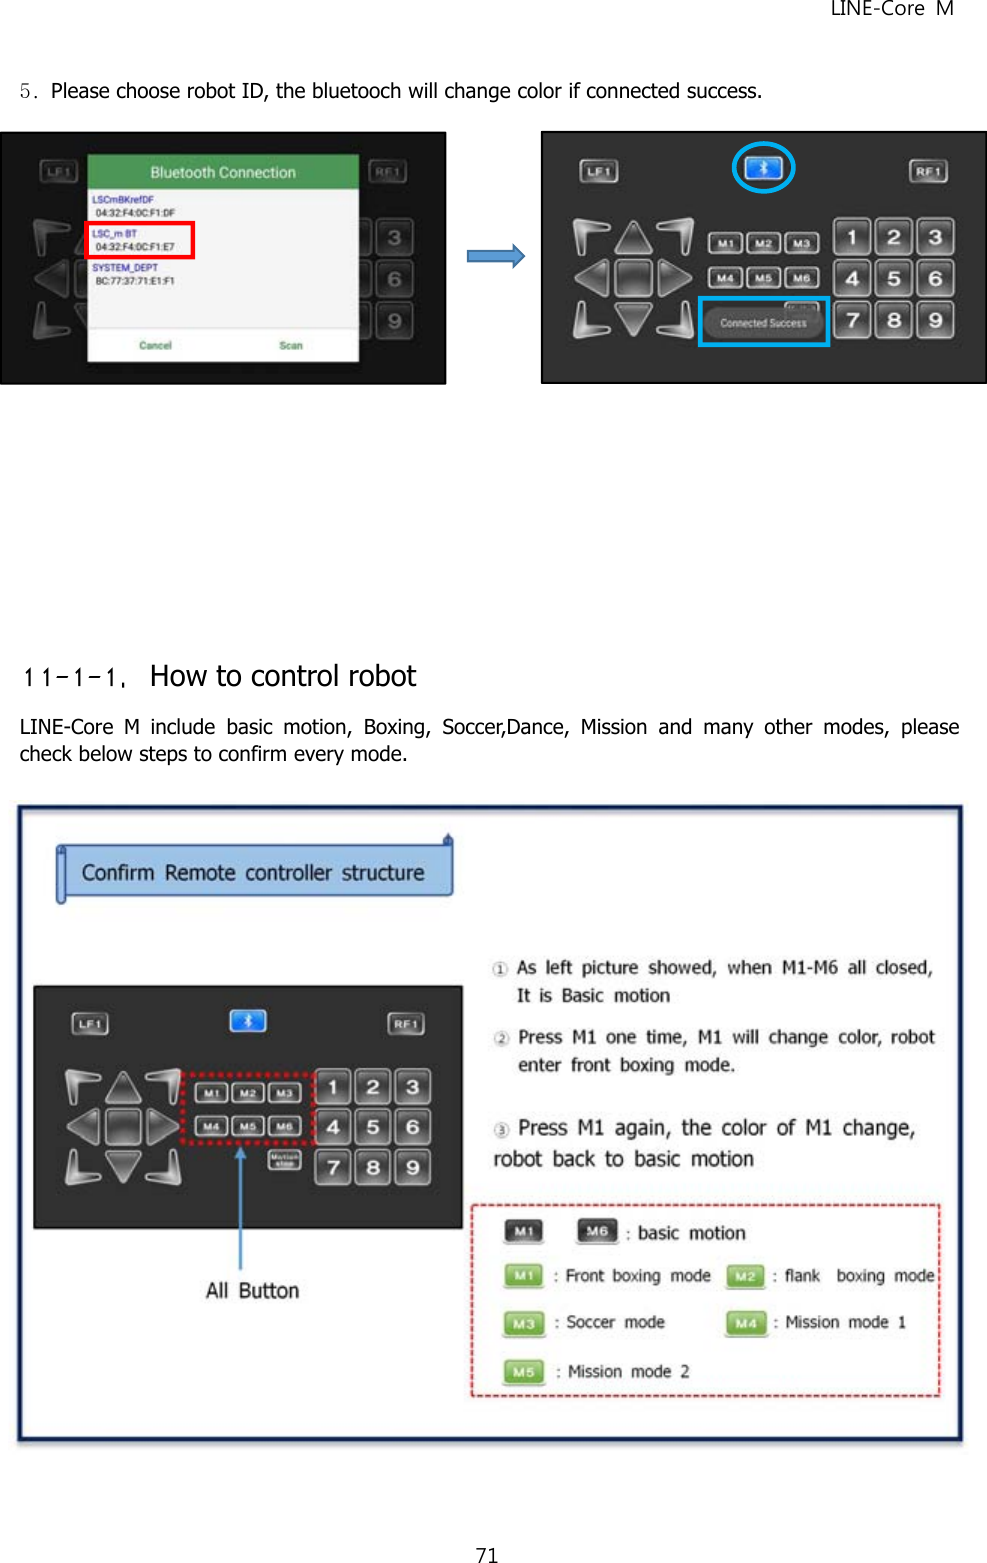 LINE-Core M715. Please choose robot ID, the bluetooch will change color if connected success.11-1-1. How to control robotLINE-Core M include basic motion, Boxing, Soccer,Dance, Mission and many other modes, pleasecheck below steps to confirm every mode.